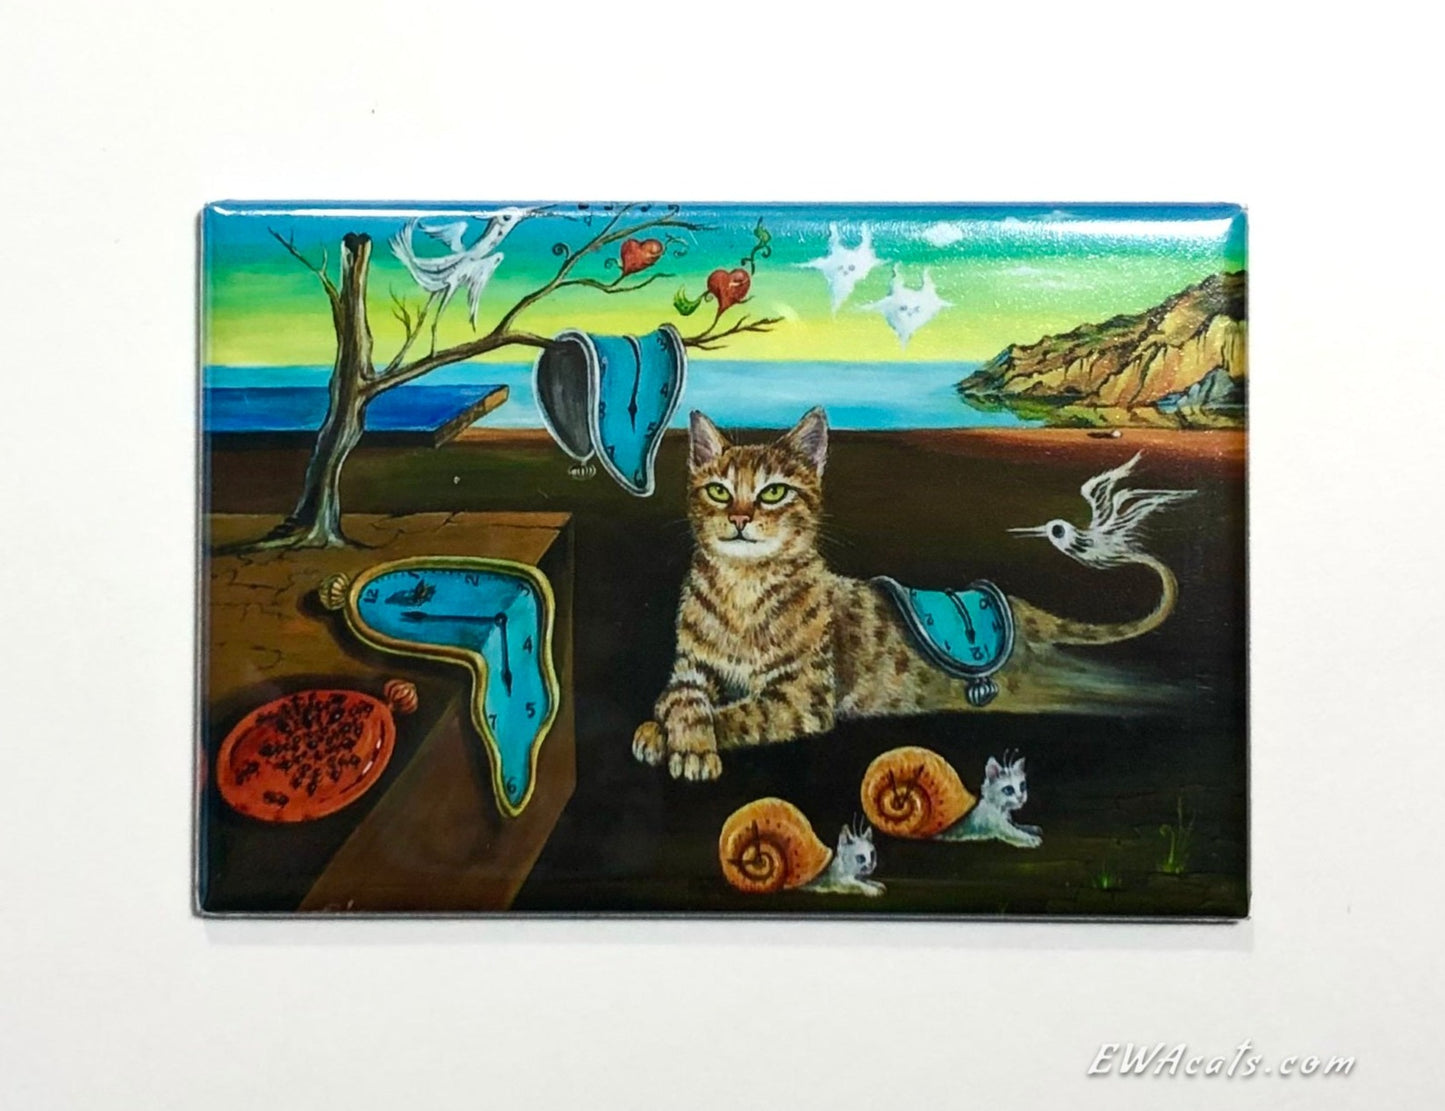 MAGNET 2"x 3" Rectangle "The Purrfect Time"